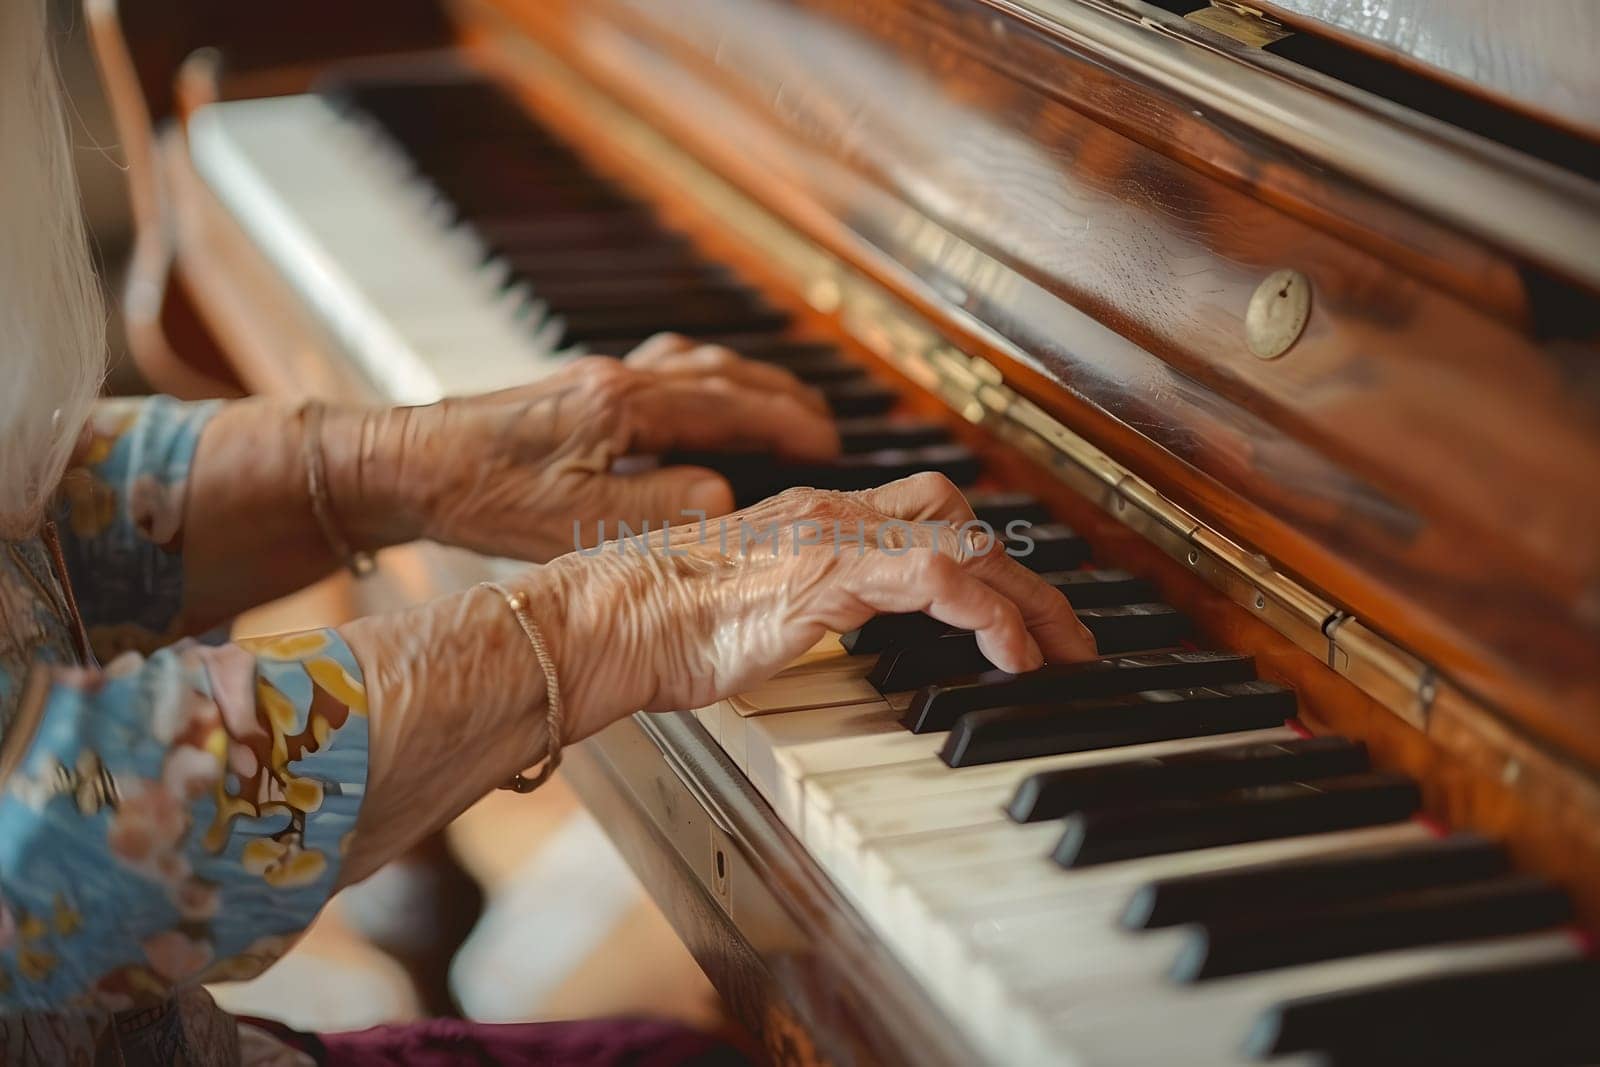 Close-up of a senior woman's hands on piano keys, expressing joy and lifelong love for music in a serene indoor setting.